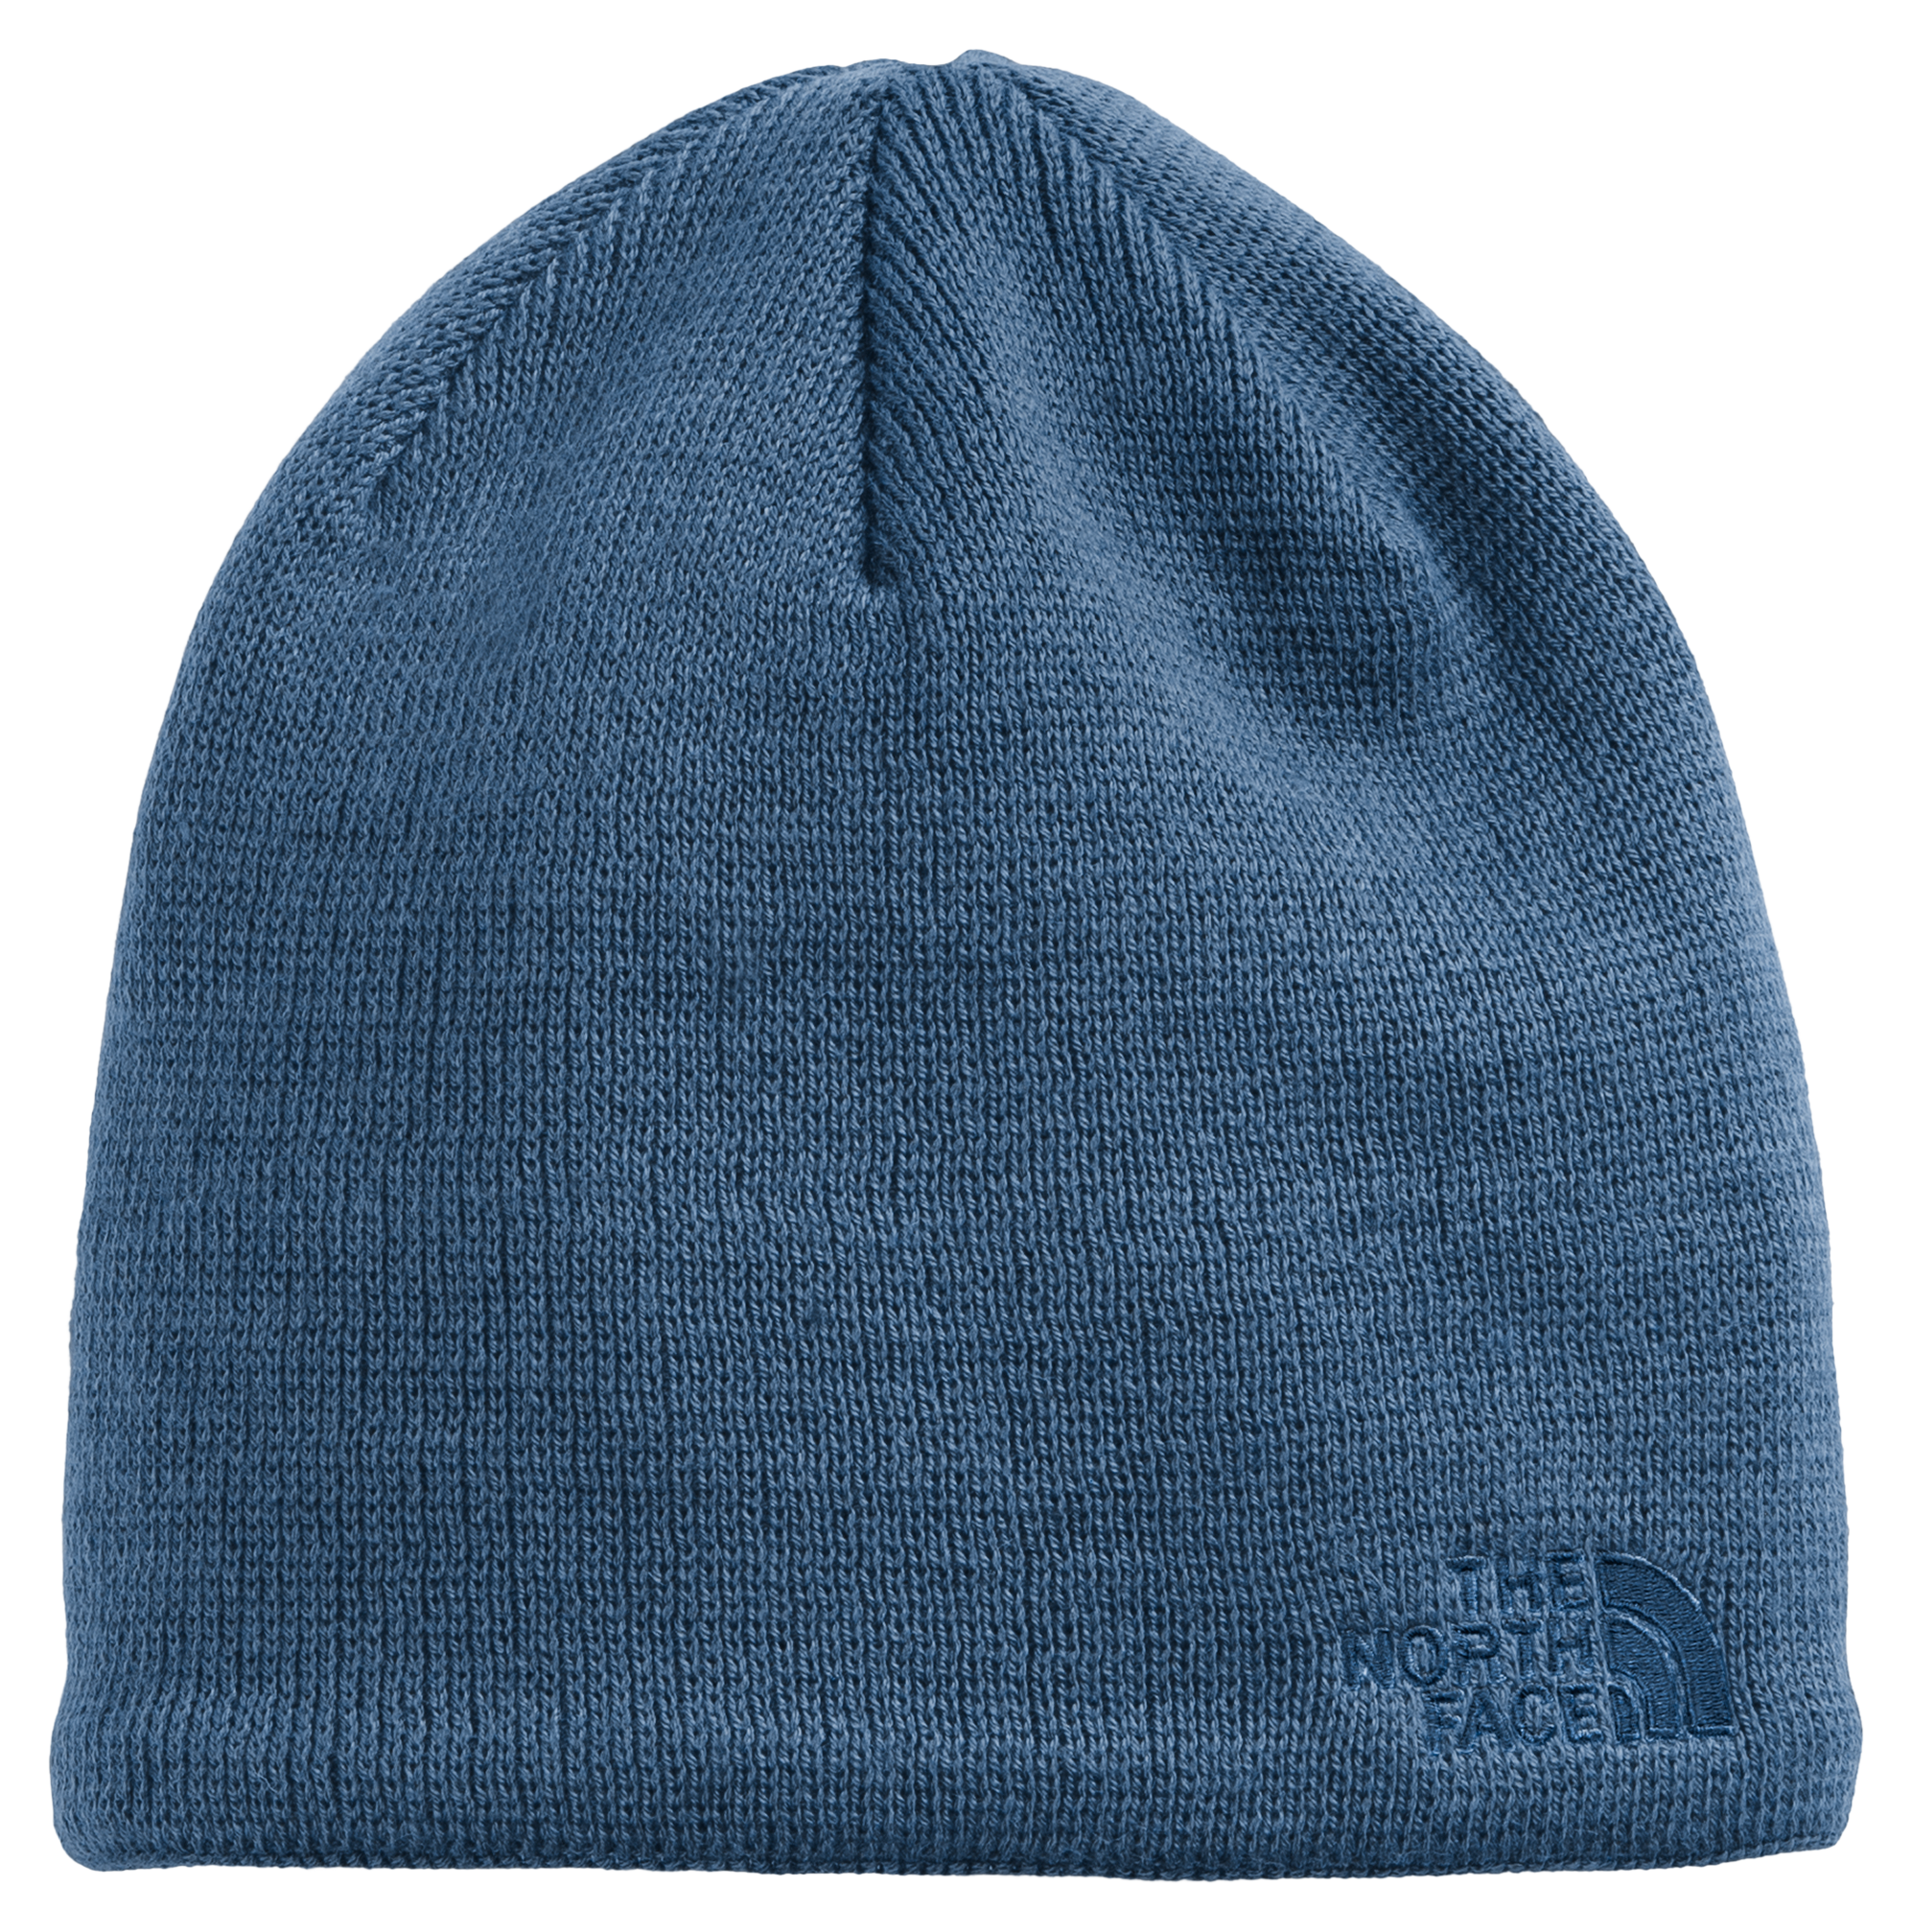 THE NORTH FACE Men's Bones Recycled Beanie, Asphalt Grey, One Size :  : Clothing, Shoes & Accessories